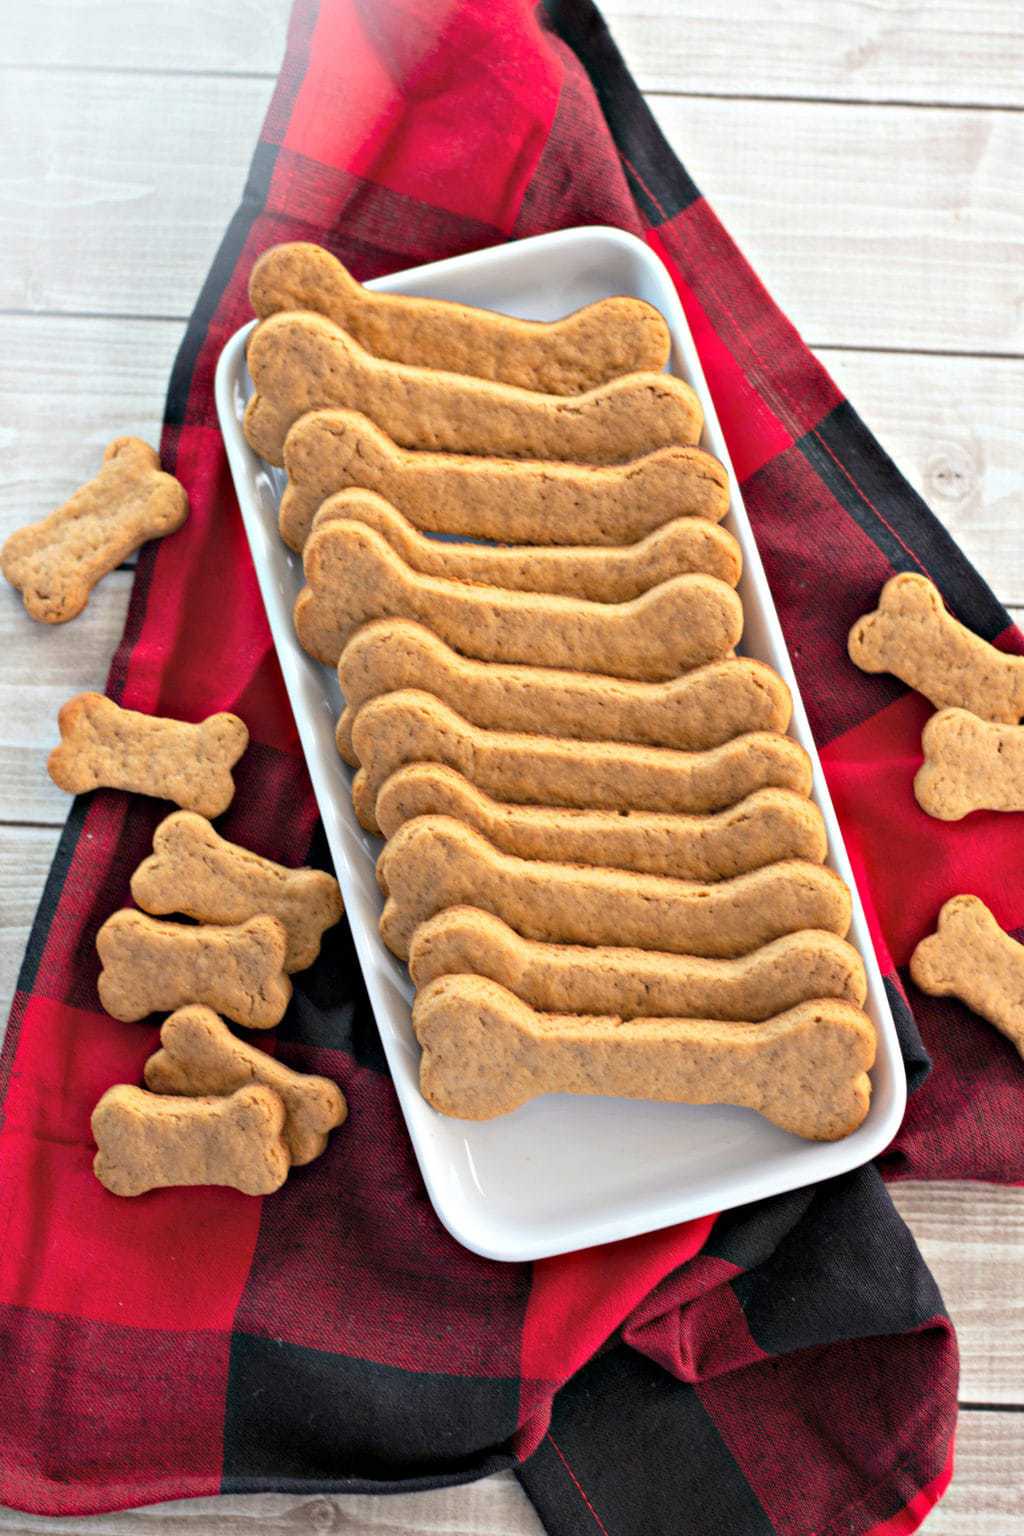 Homemade Dog Treats - Dog Treat Recipe Made With Only 5 Ingredients!